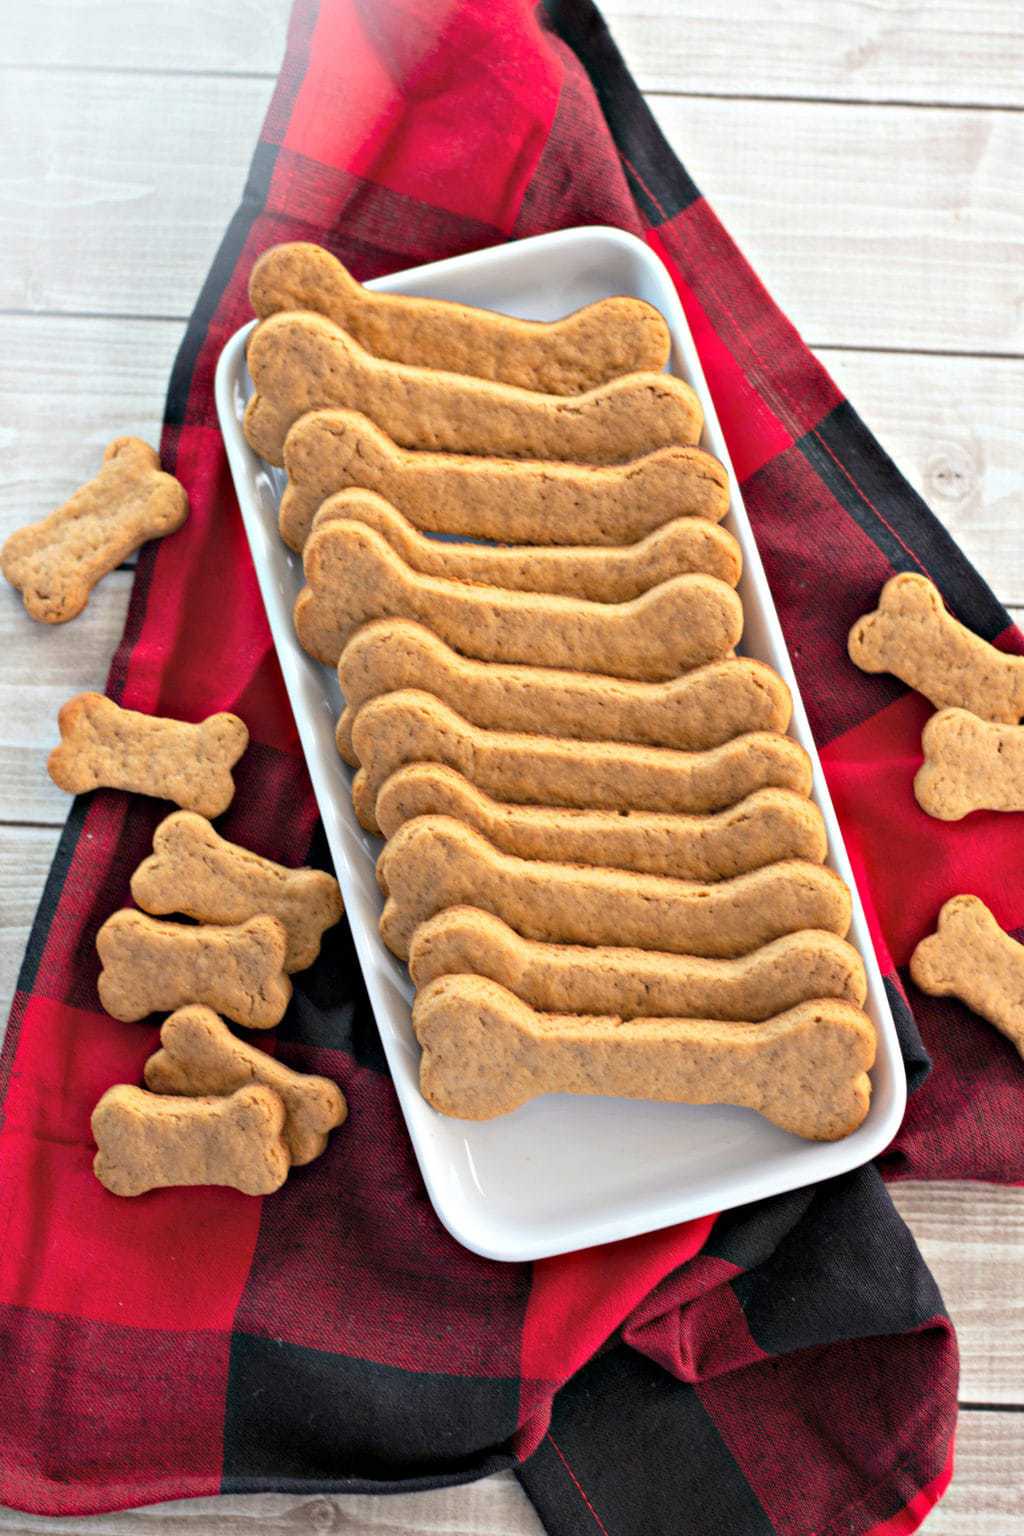 Homemade Dog Treats - Dog Treat Recipe Made With Only 5 Ingredients!